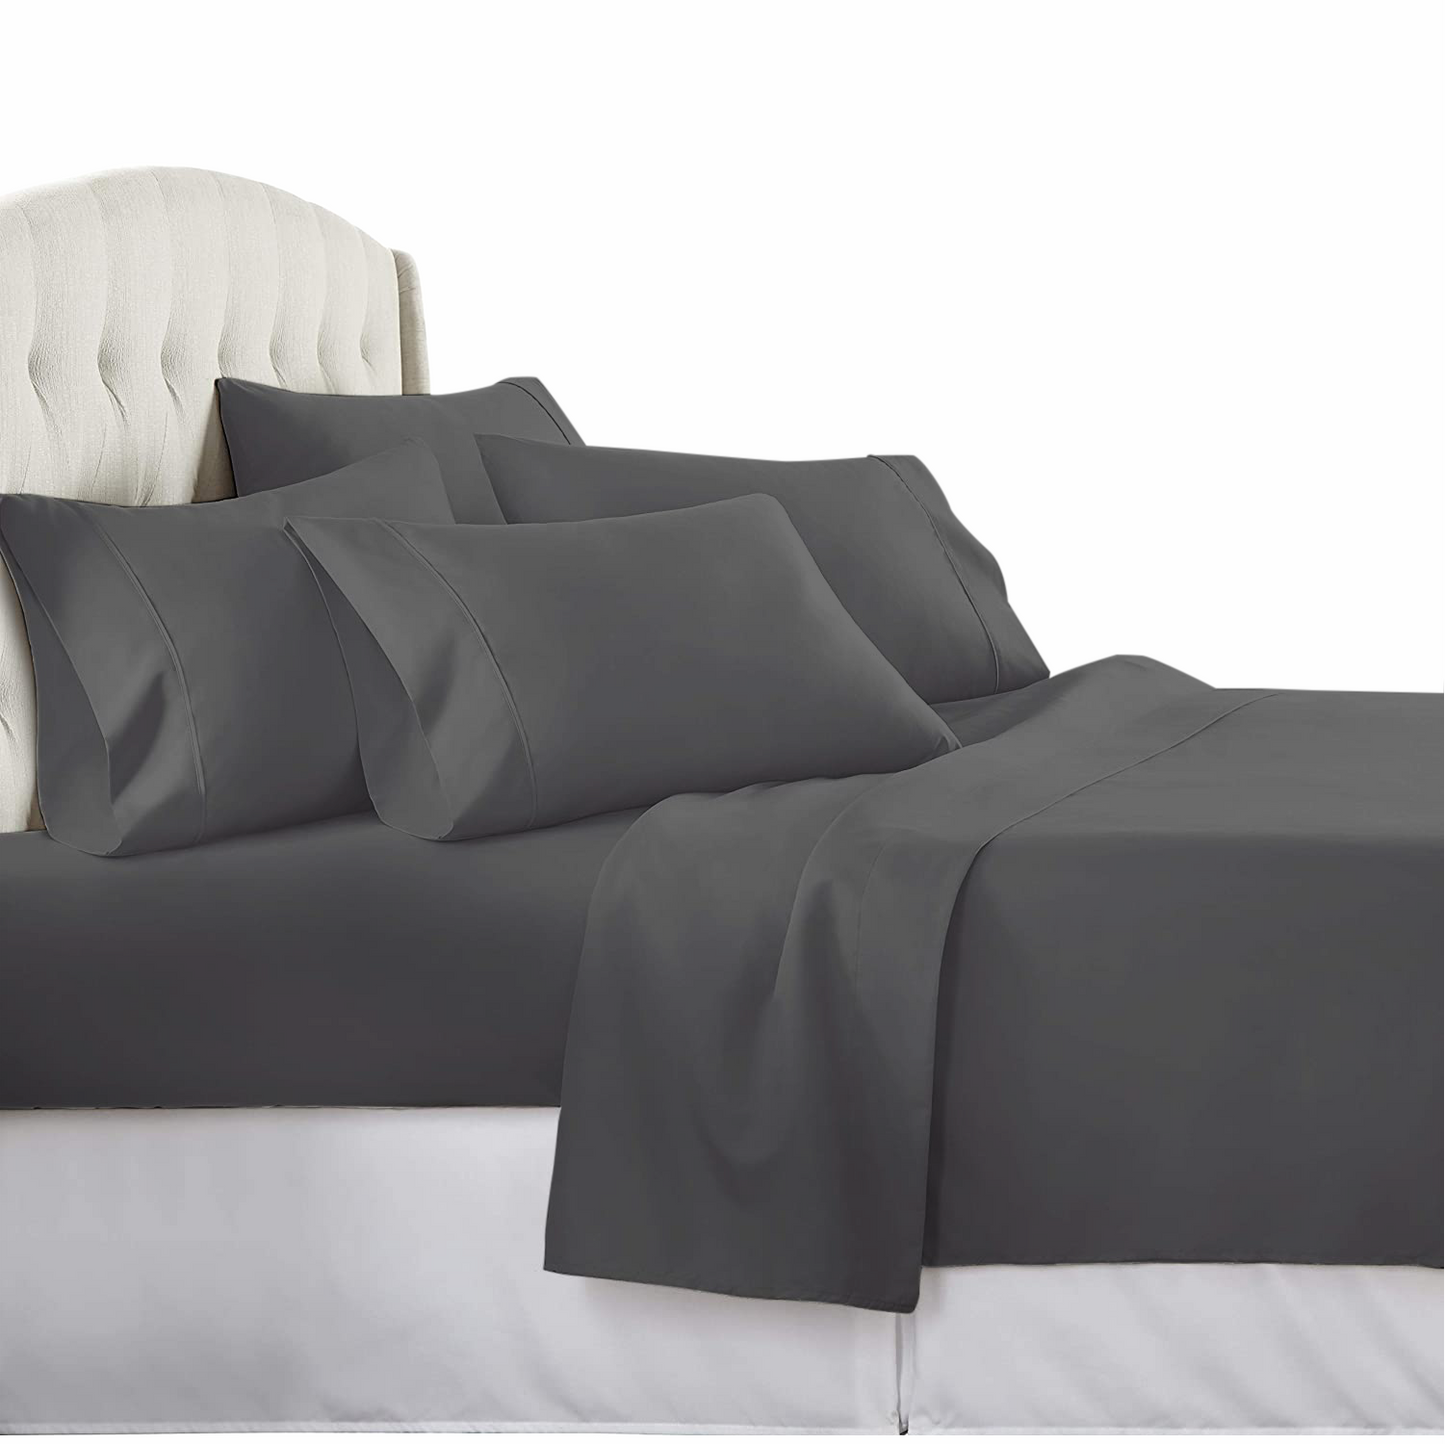 Double Bed Sheet Set Cotton 300 TC - 1 Flat Sheet and 2 Pillow Covers